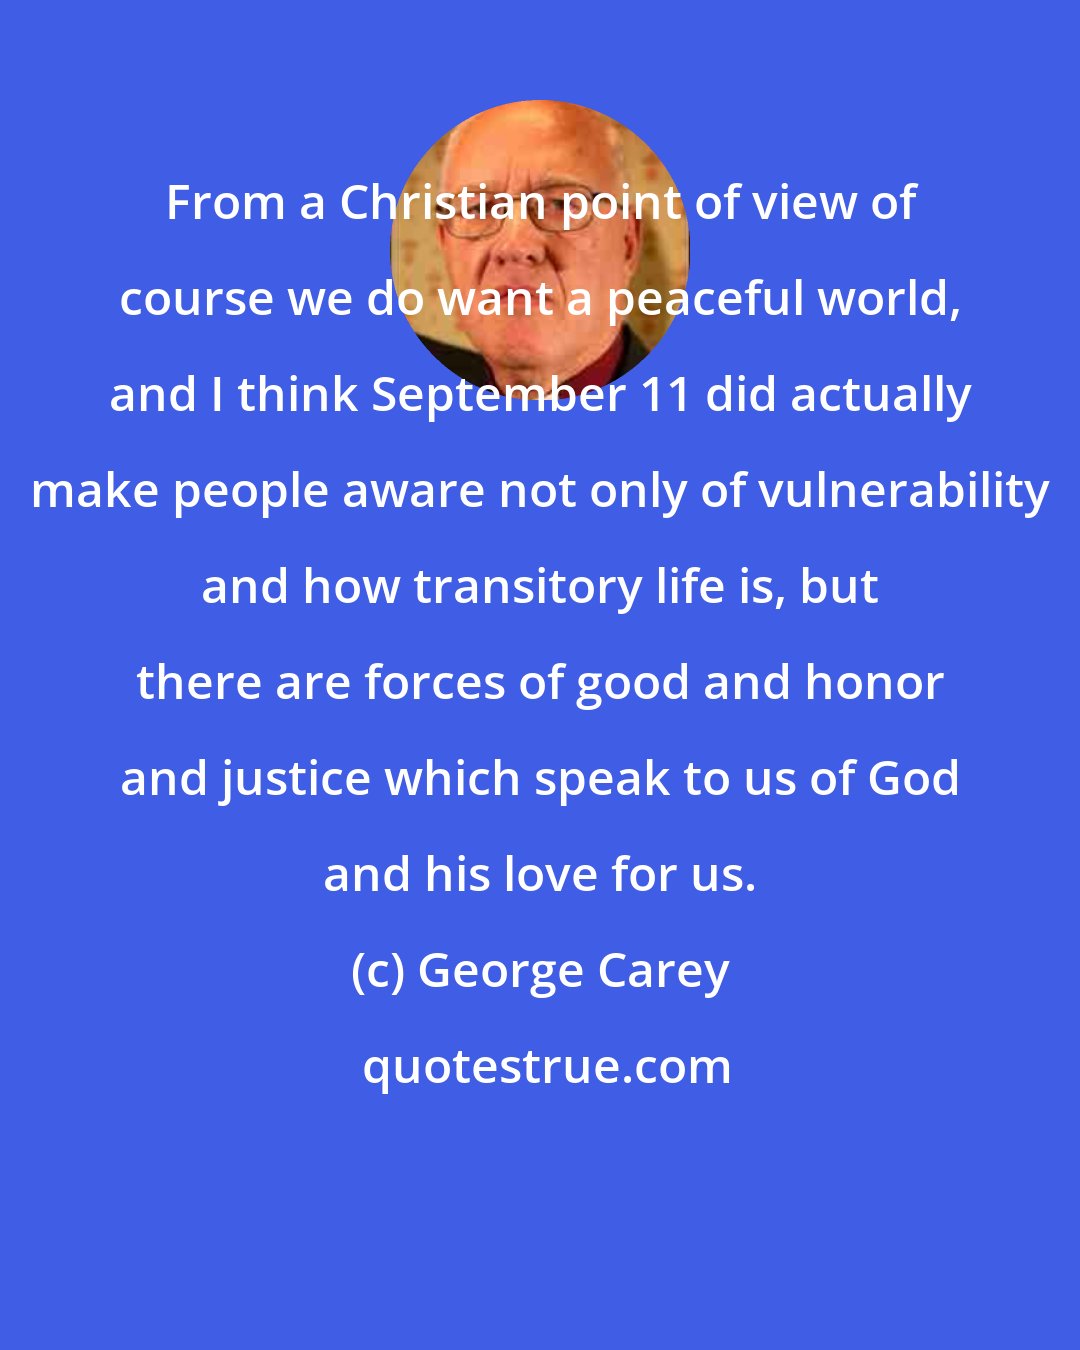 George Carey: From a Christian point of view of course we do want a peaceful world, and I think September 11 did actually make people aware not only of vulnerability and how transitory life is, but there are forces of good and honor and justice which speak to us of God and his love for us.